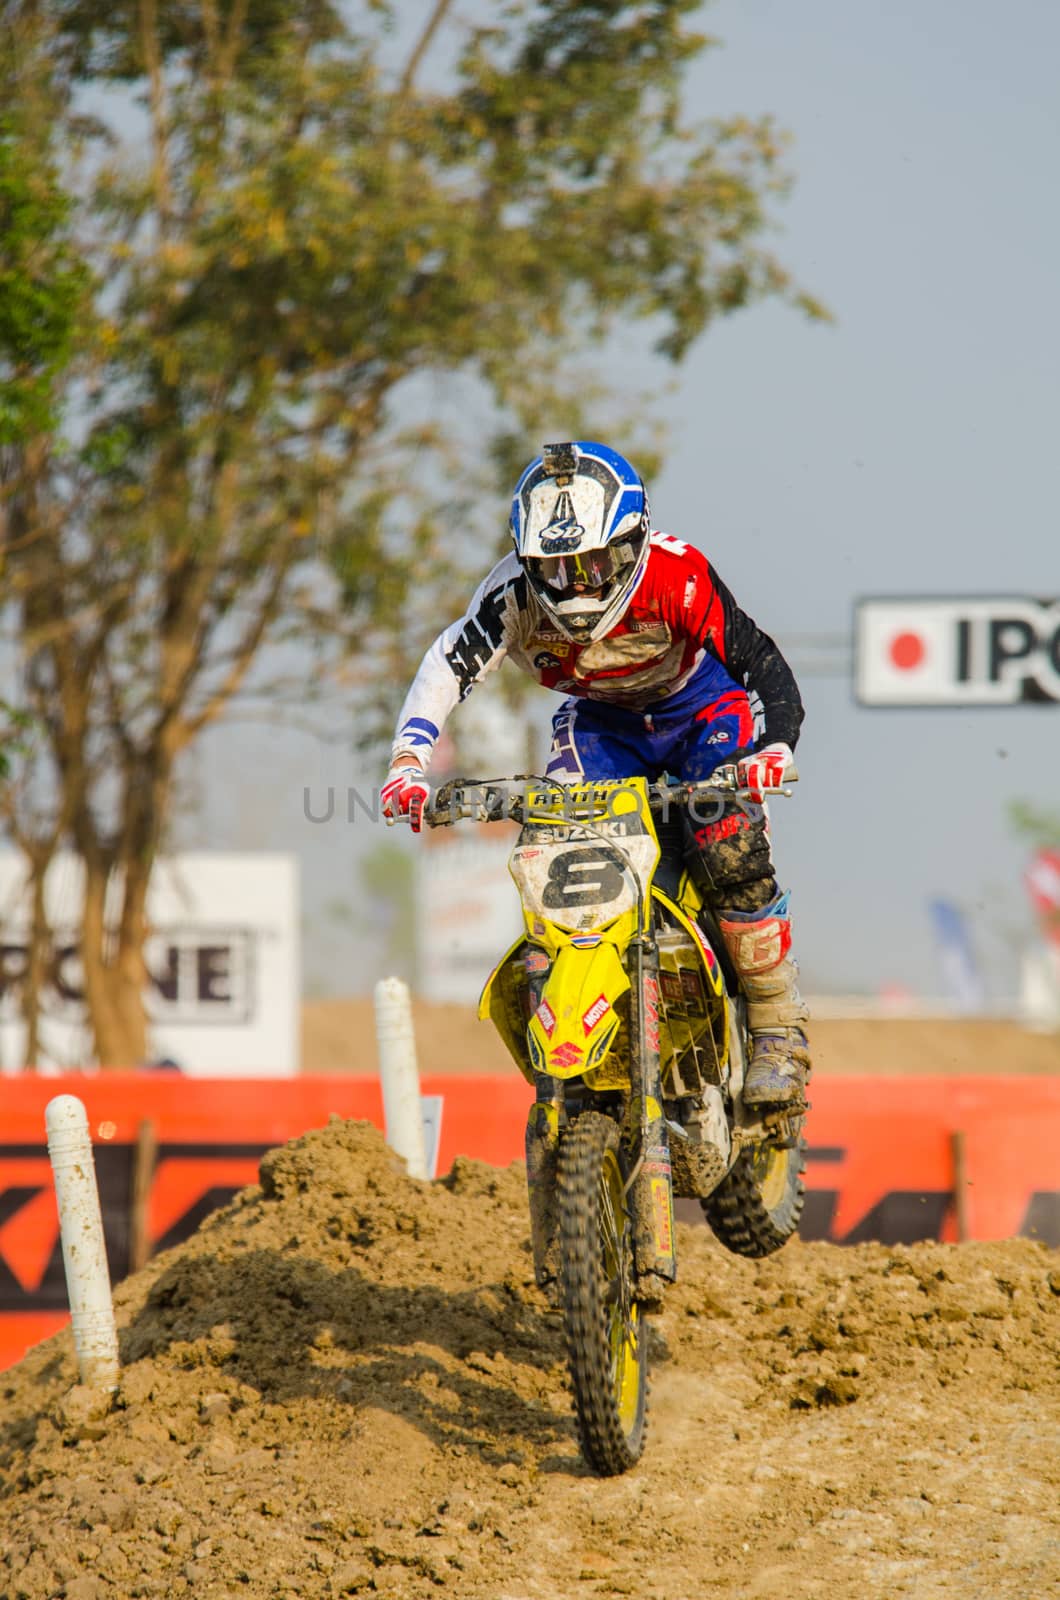 SUPHANBURI - MARCH 06 : Ben Townley #8 with Suzuki Motorcycle in competes during the FIM MXGP Motocross Wolrd Championship Grand Prix of Thailand 2016 on March 06, 2016 in Suphanburi, Thailand.